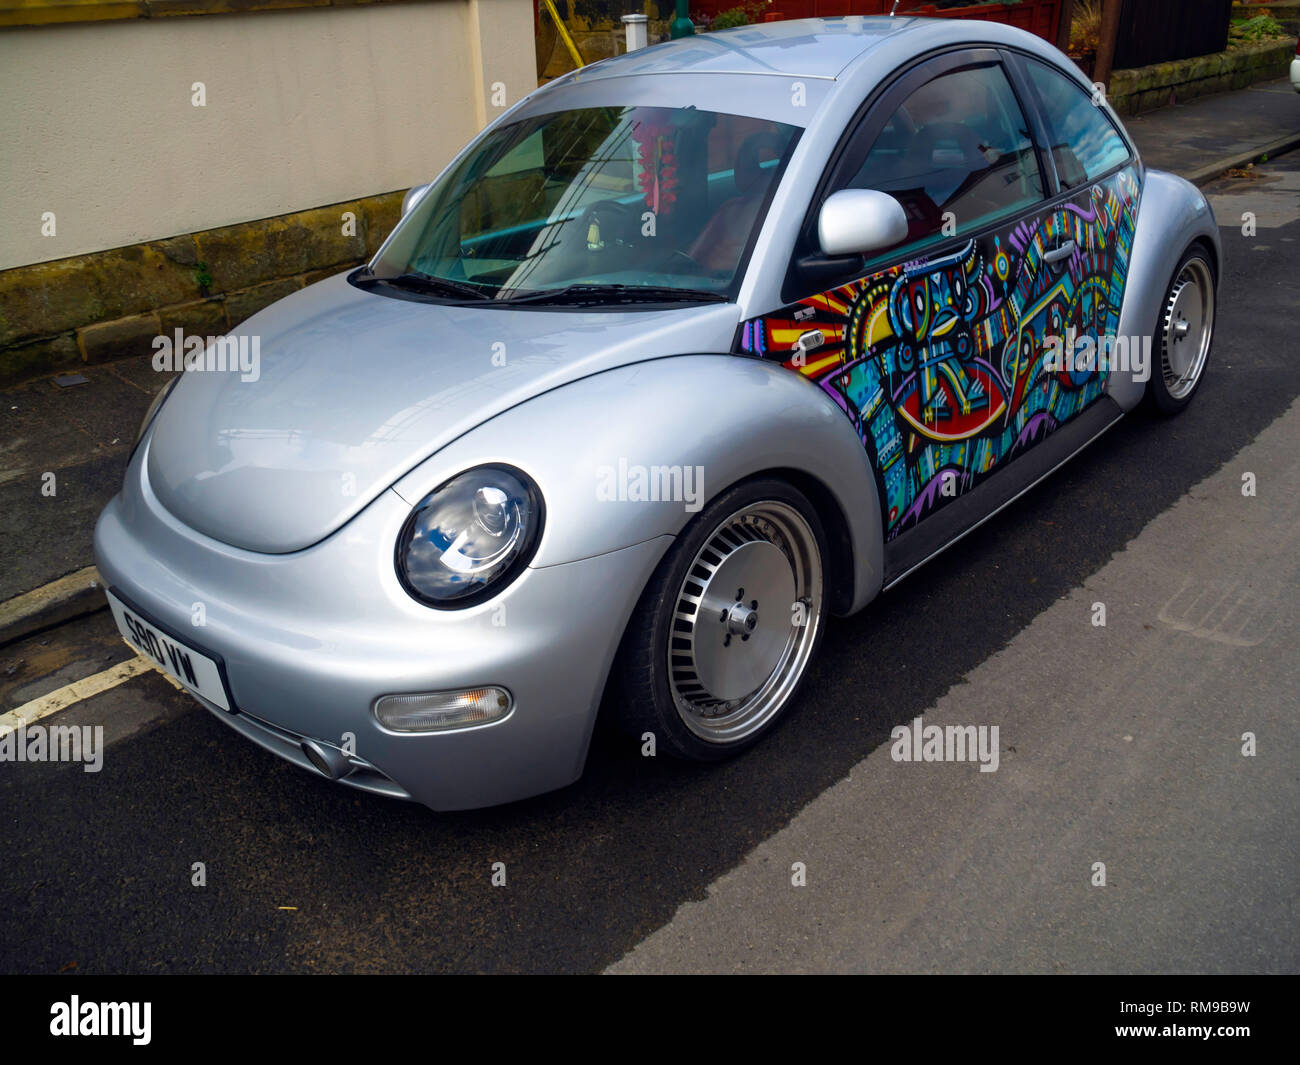 New type Volkswagen Beetle car in silver with artwork painted on the doors Stock Photo